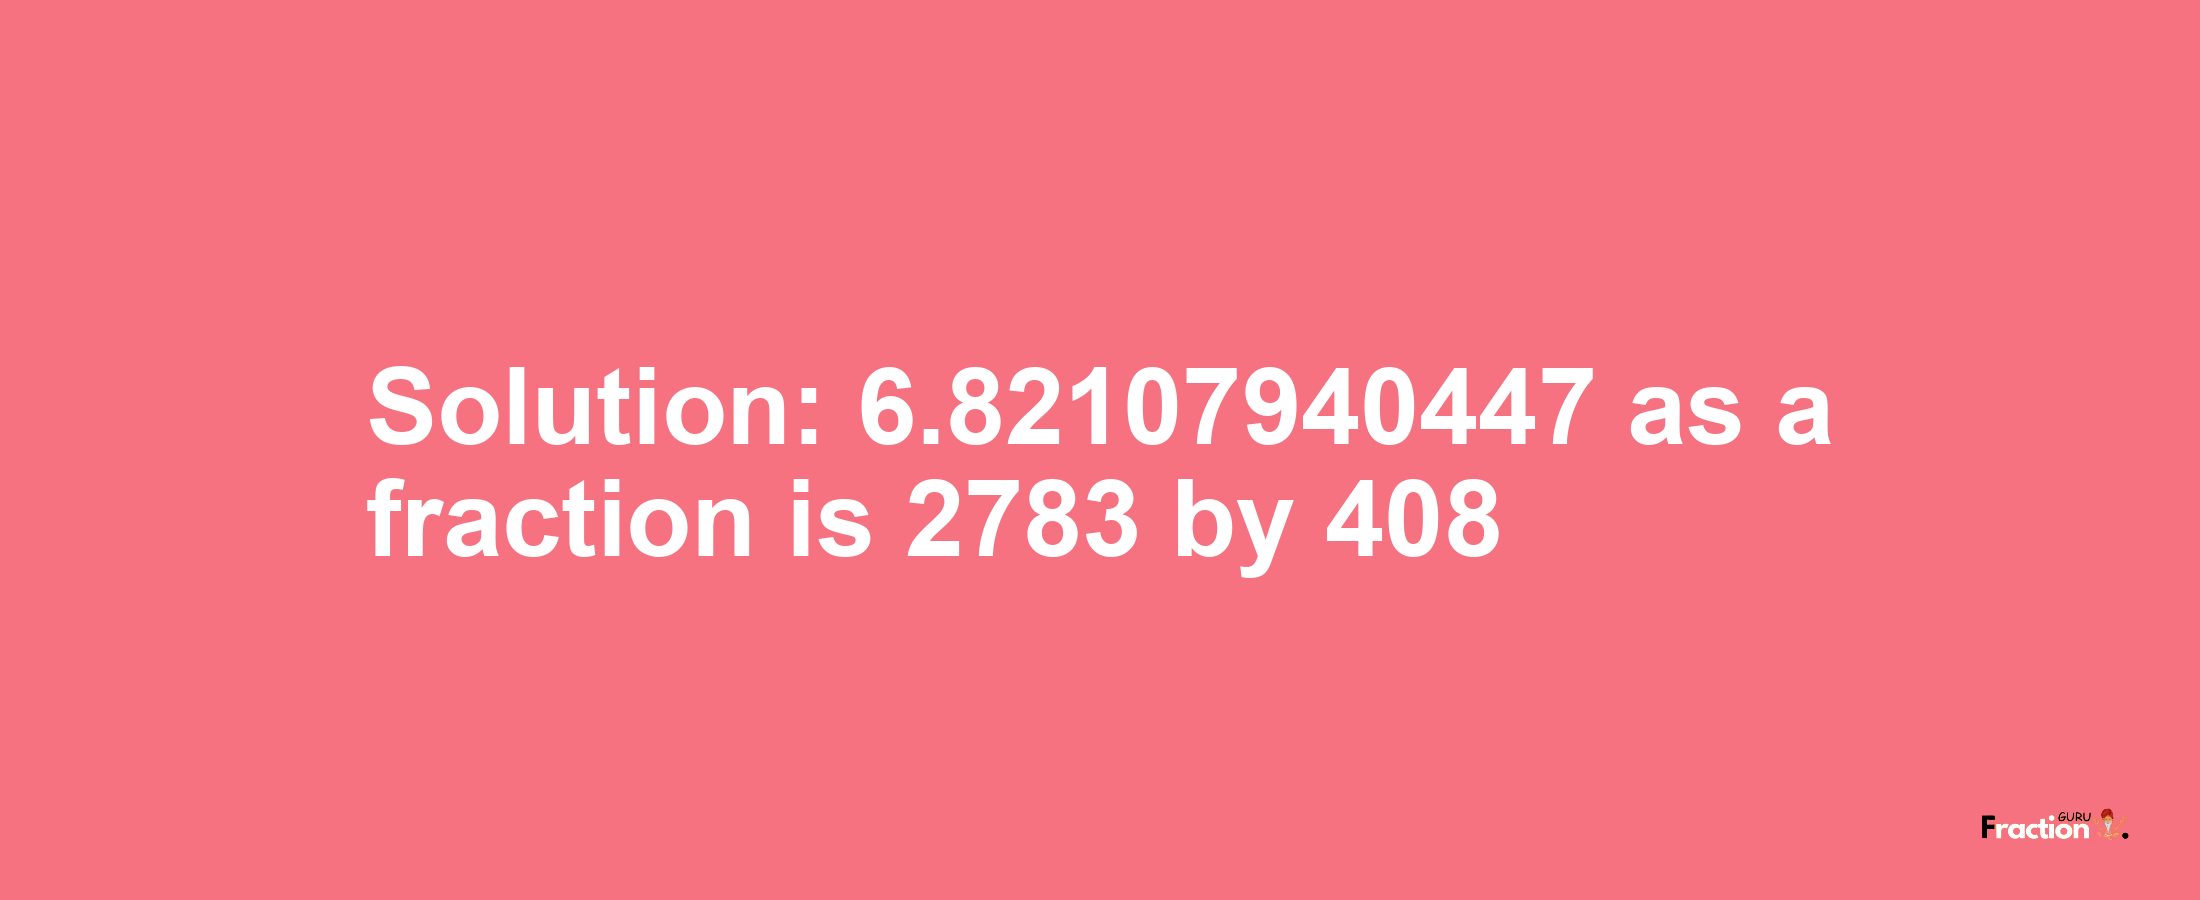 Solution:6.82107940447 as a fraction is 2783/408